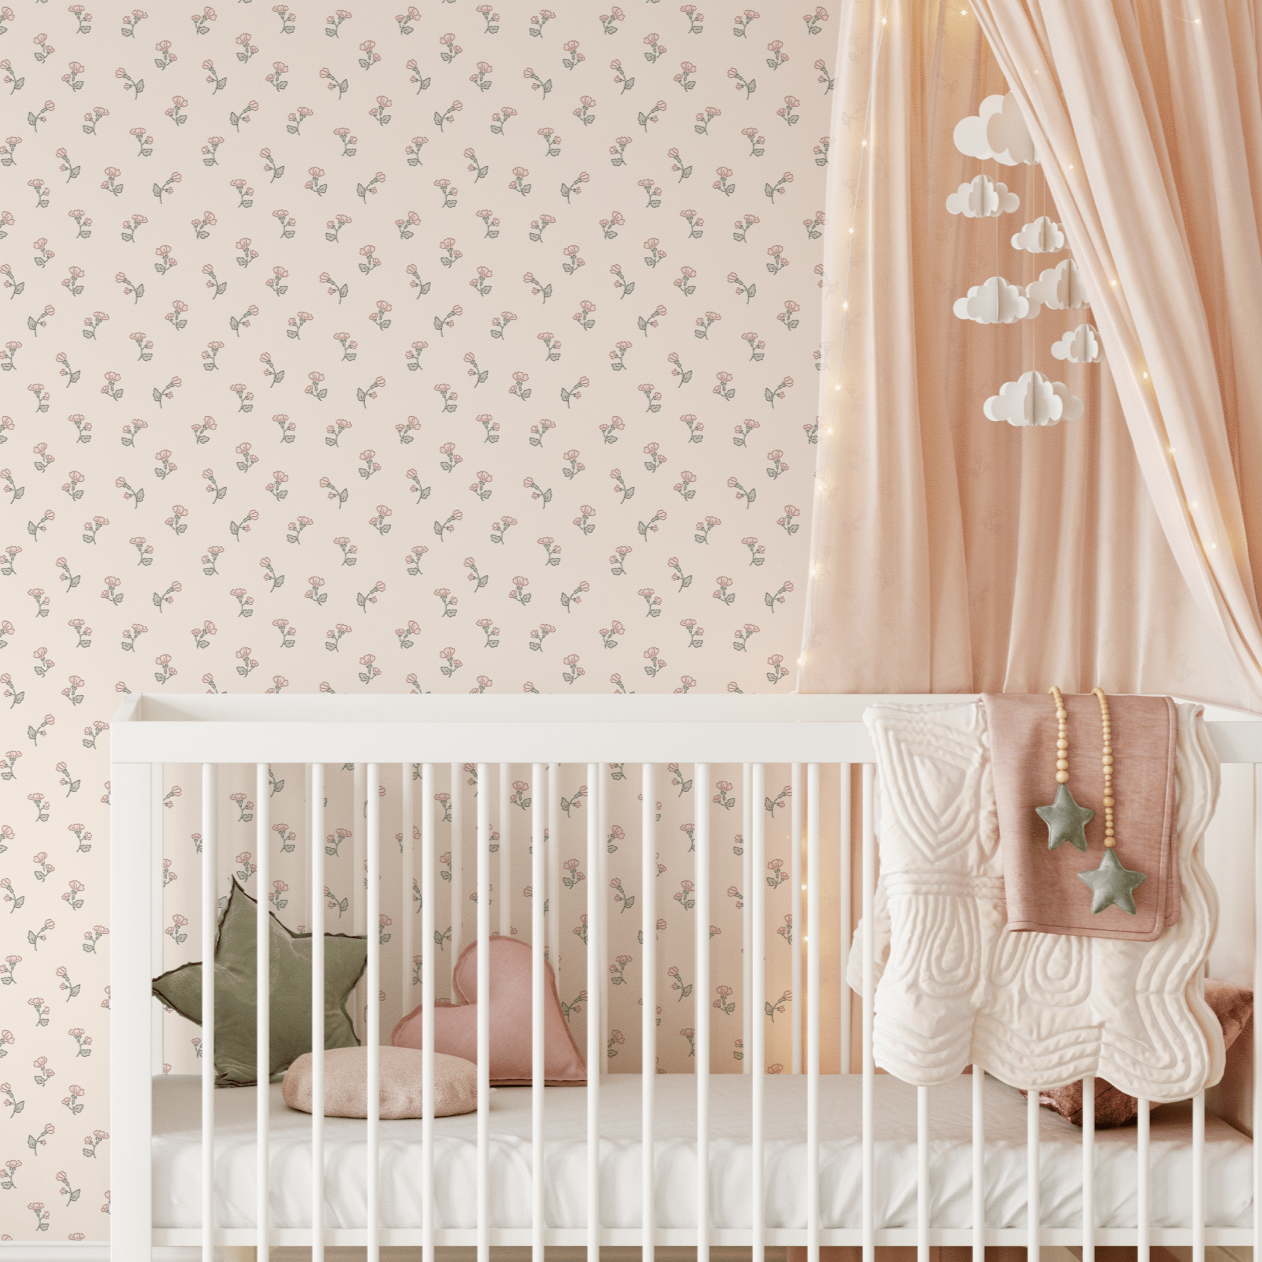 Nursery adorned with floral wallpaper, crib, canopy, and soft furnishings.